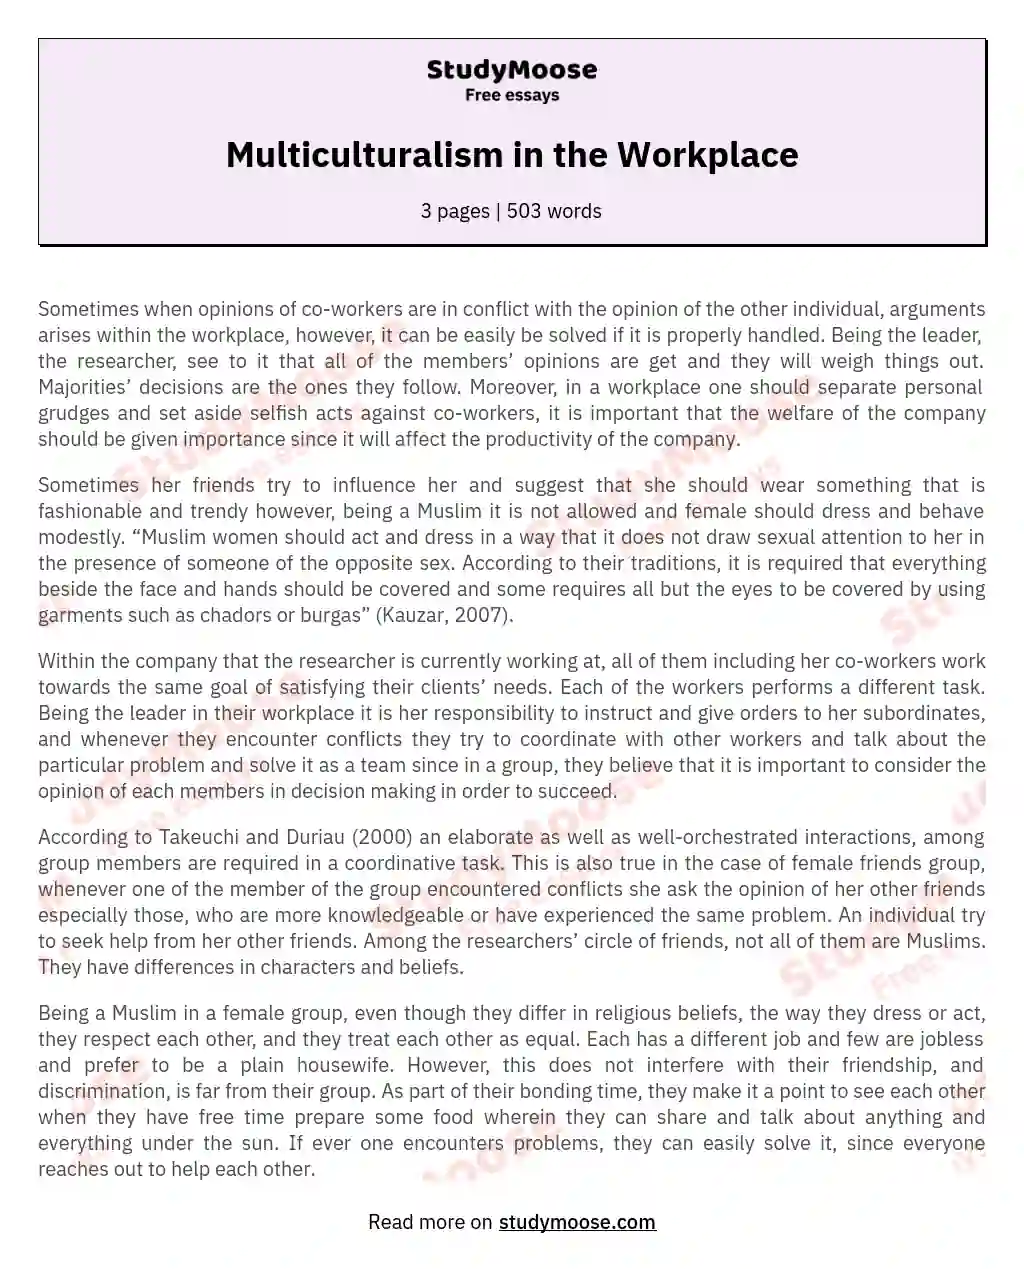 Multiculturalism in the Workplace essay